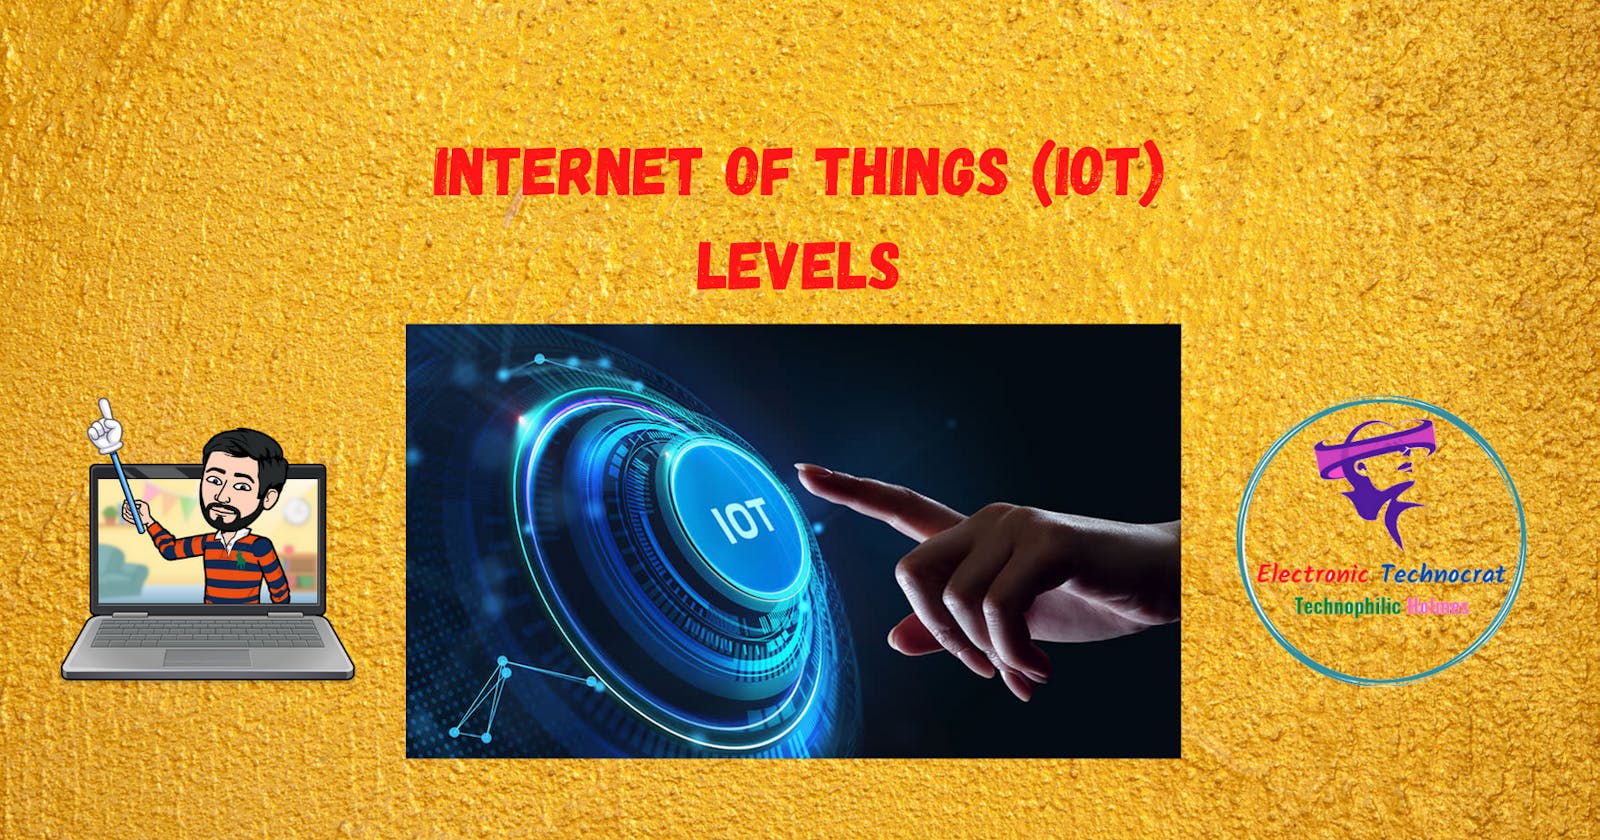 Internet of Things (IoT) Levels